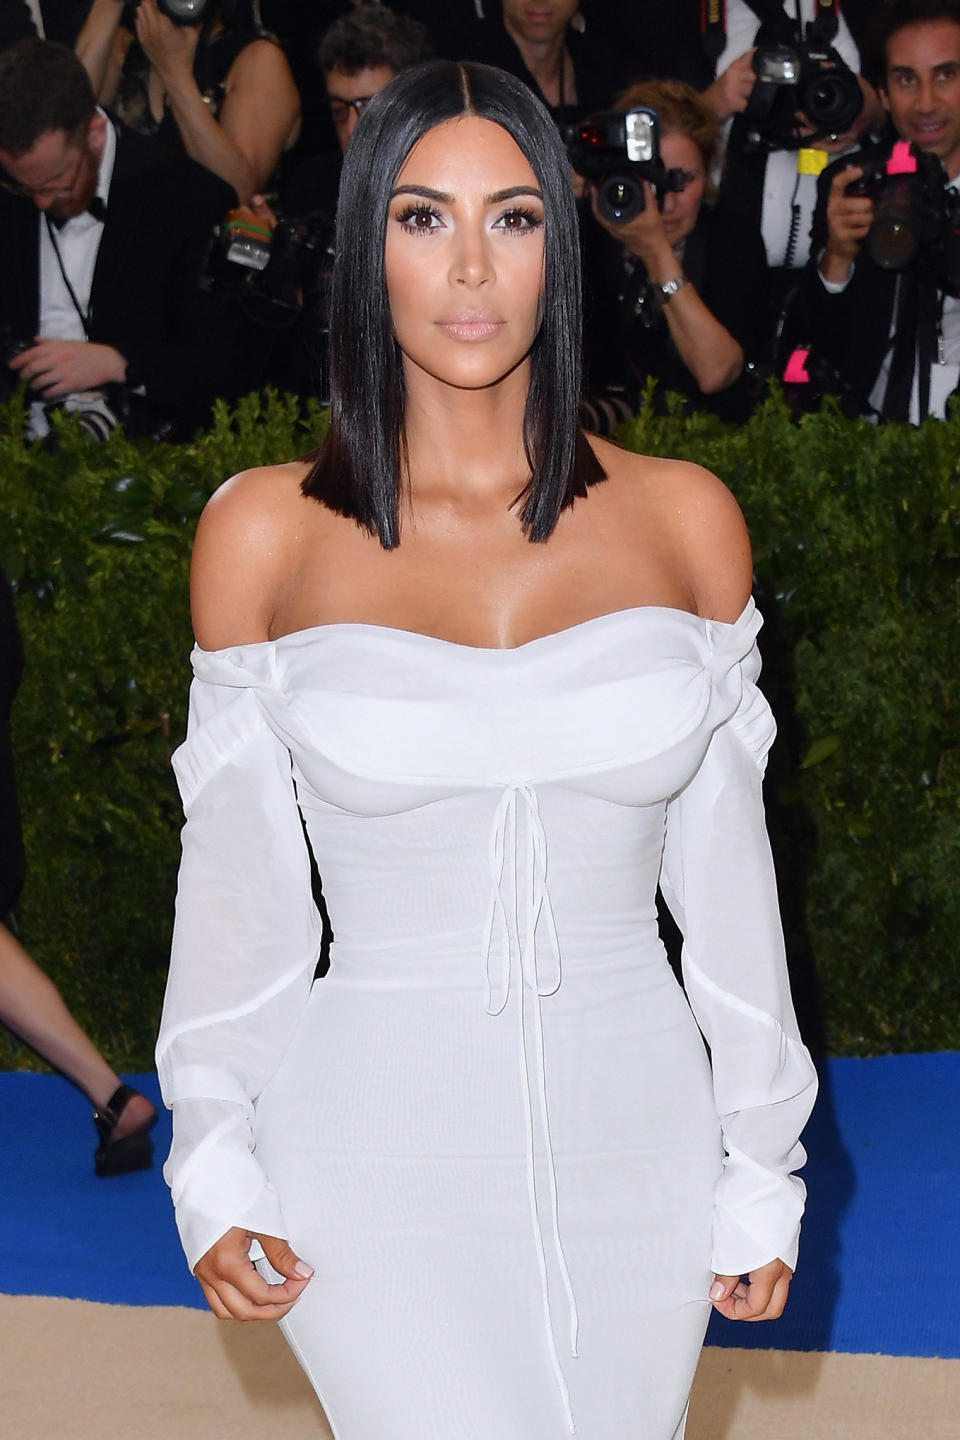 NEW YORK, NY - MAY 01:  Kim Kardashian West  attends the 'Rei Kawakubo/Comme des Garcons: Art Of The In-Between' Costume Institute Gala at Metropolitan Museum of Art on May 1, 2017 in New York City.  (Photo by George Pimentel/WireImage)